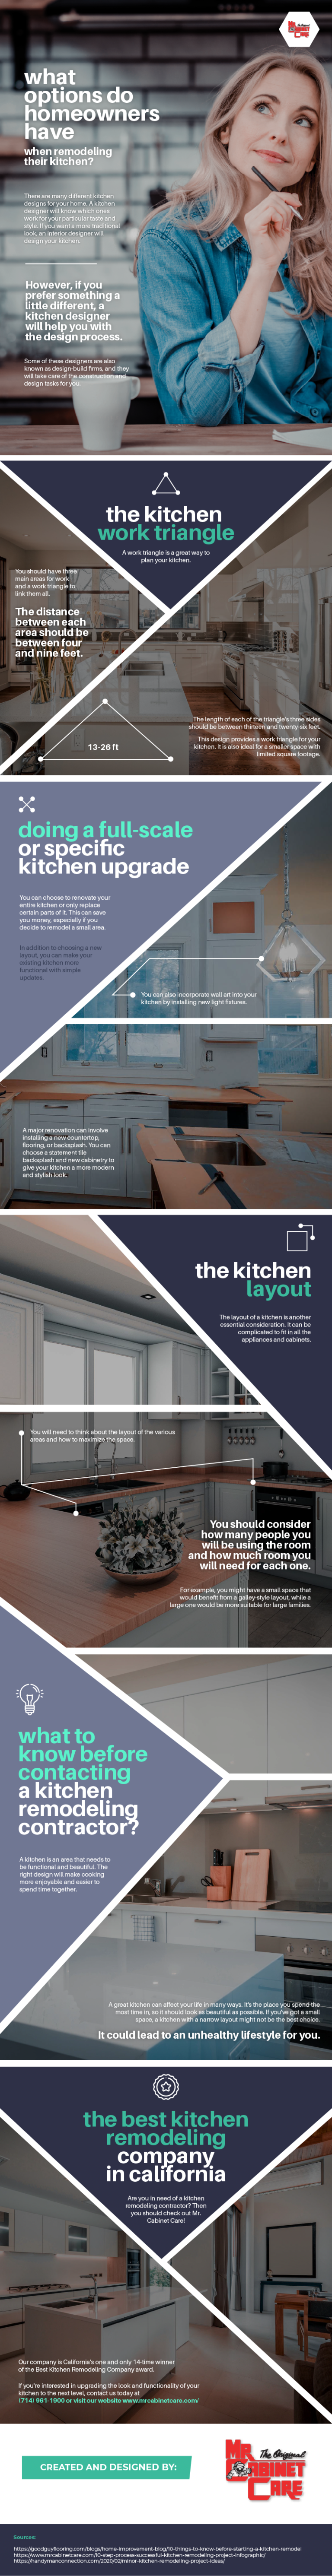 What_Options_Do_Homeowners_Have_When_Remodeling_Their_Kitchen_infographic_image_11
